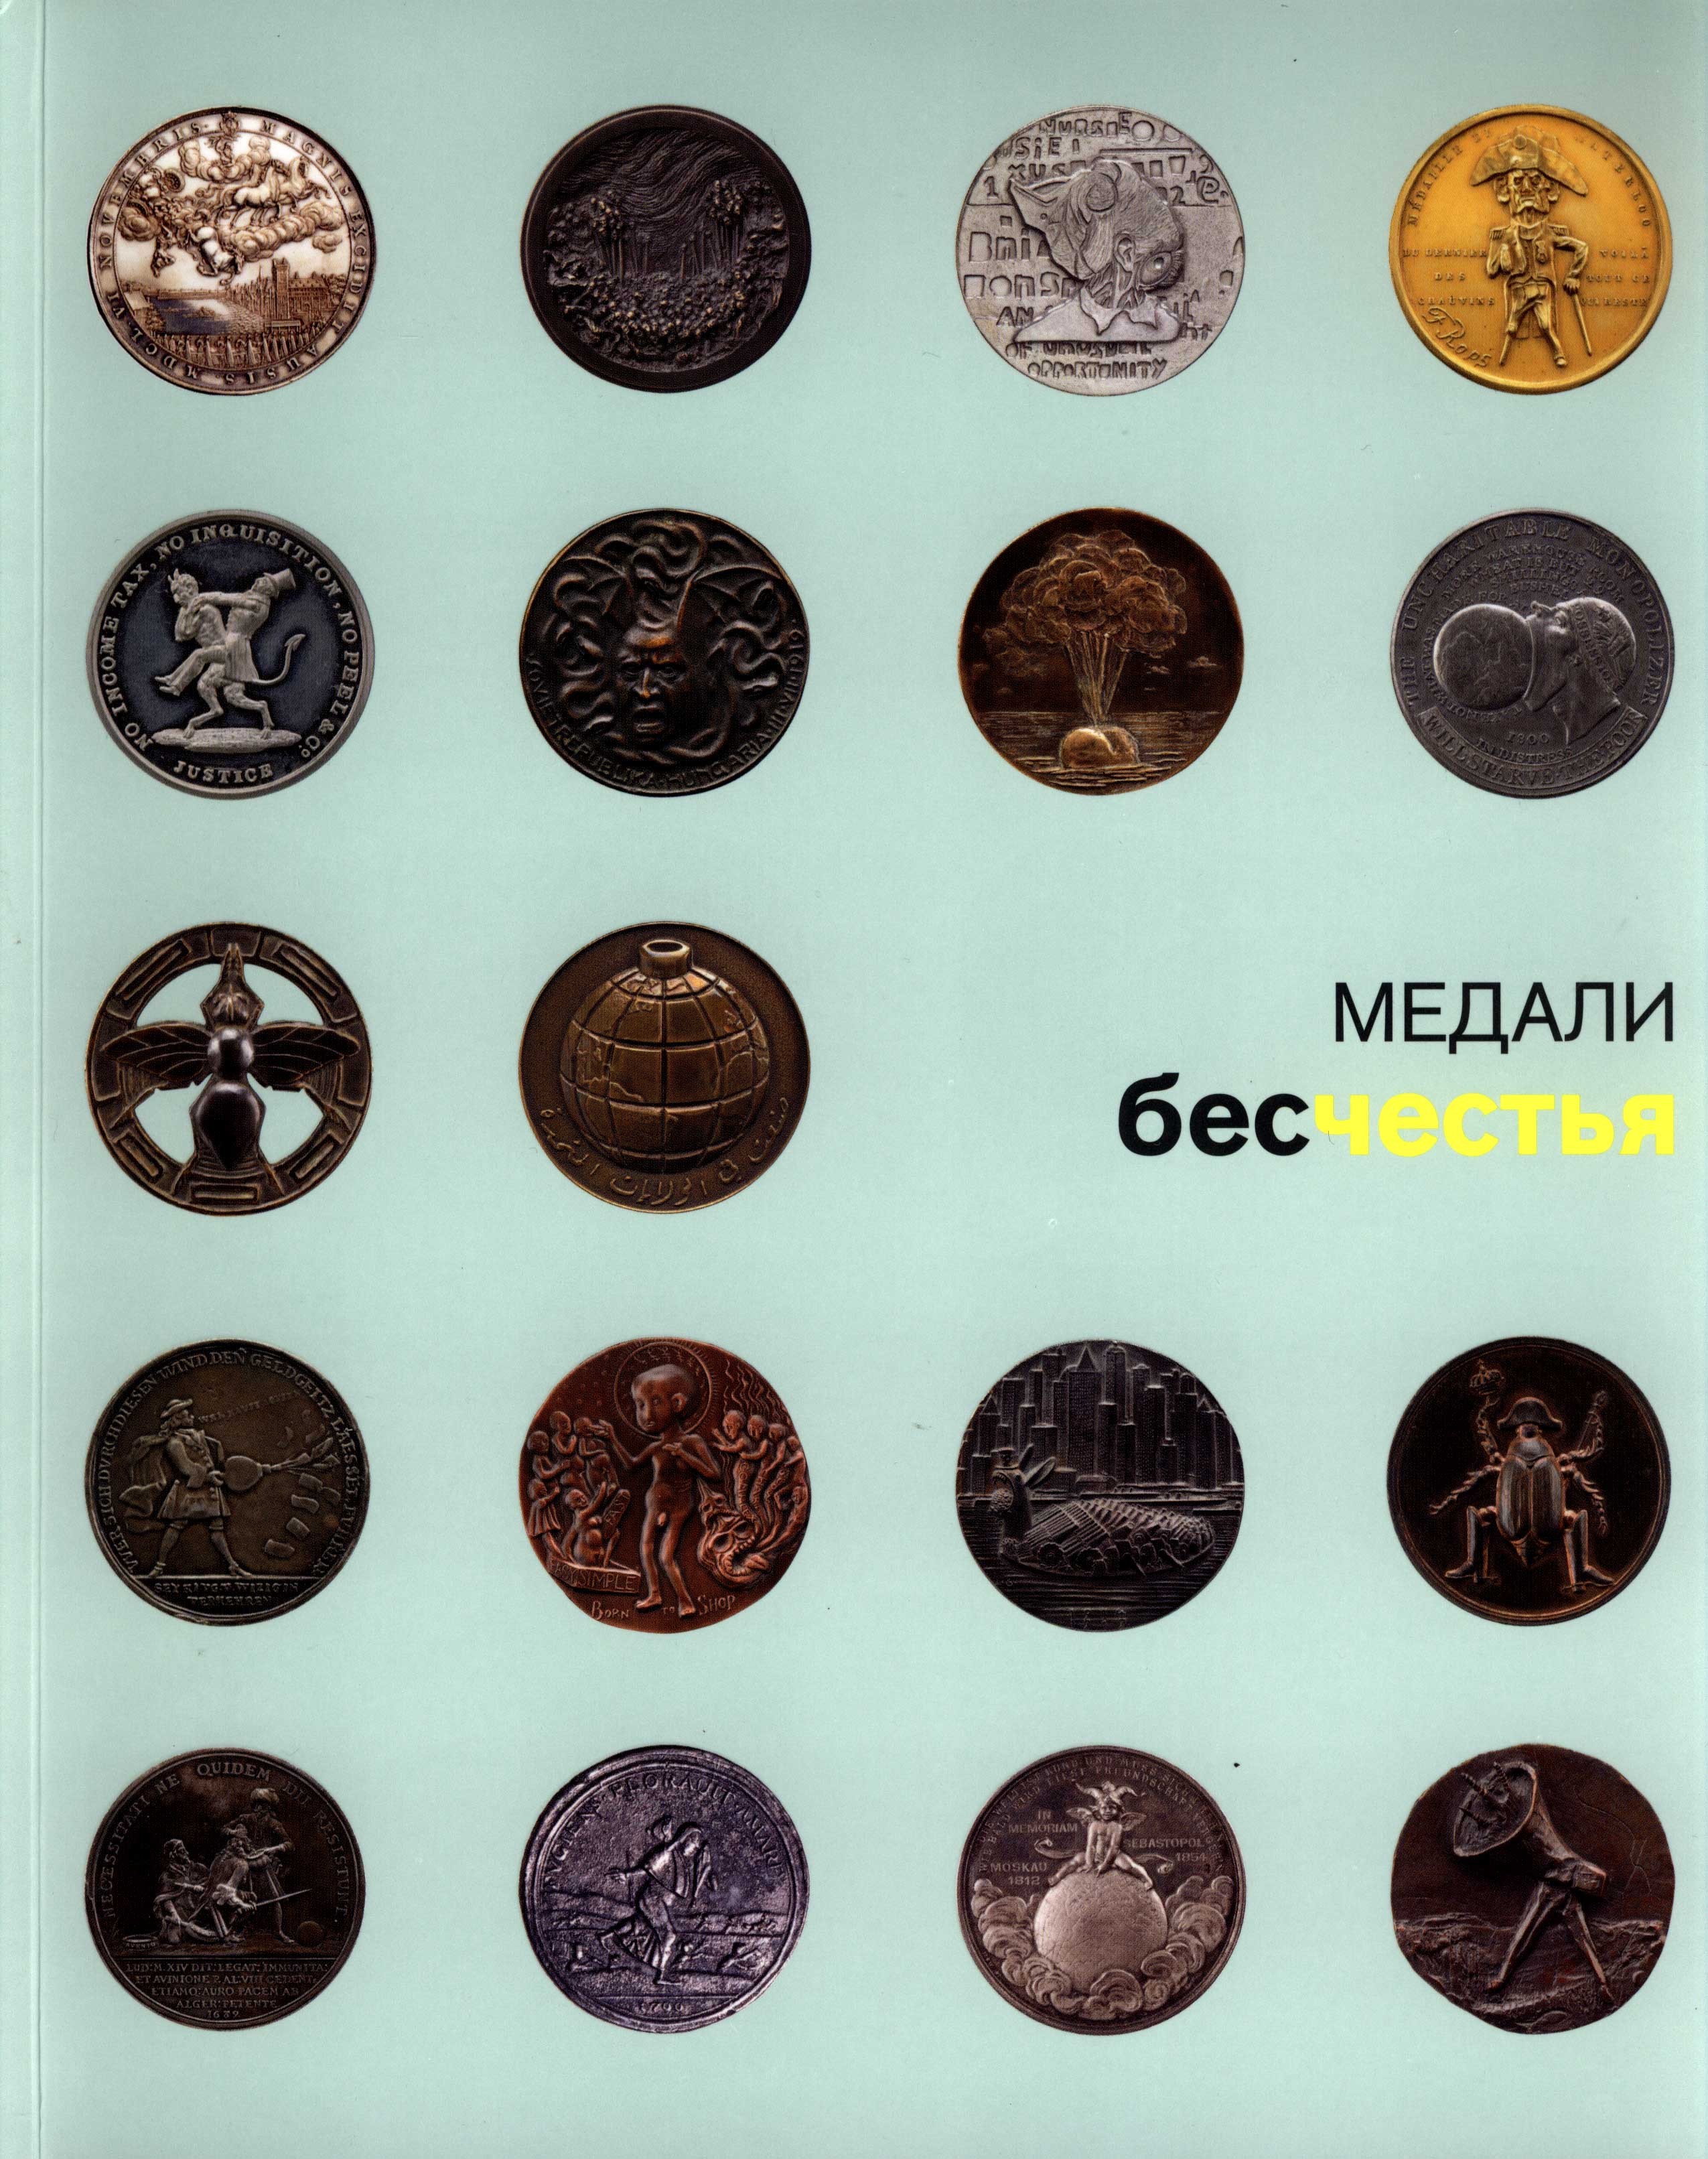 Hermitage Museum Medals of Dishonor Medal Is A Sign of Disgrace